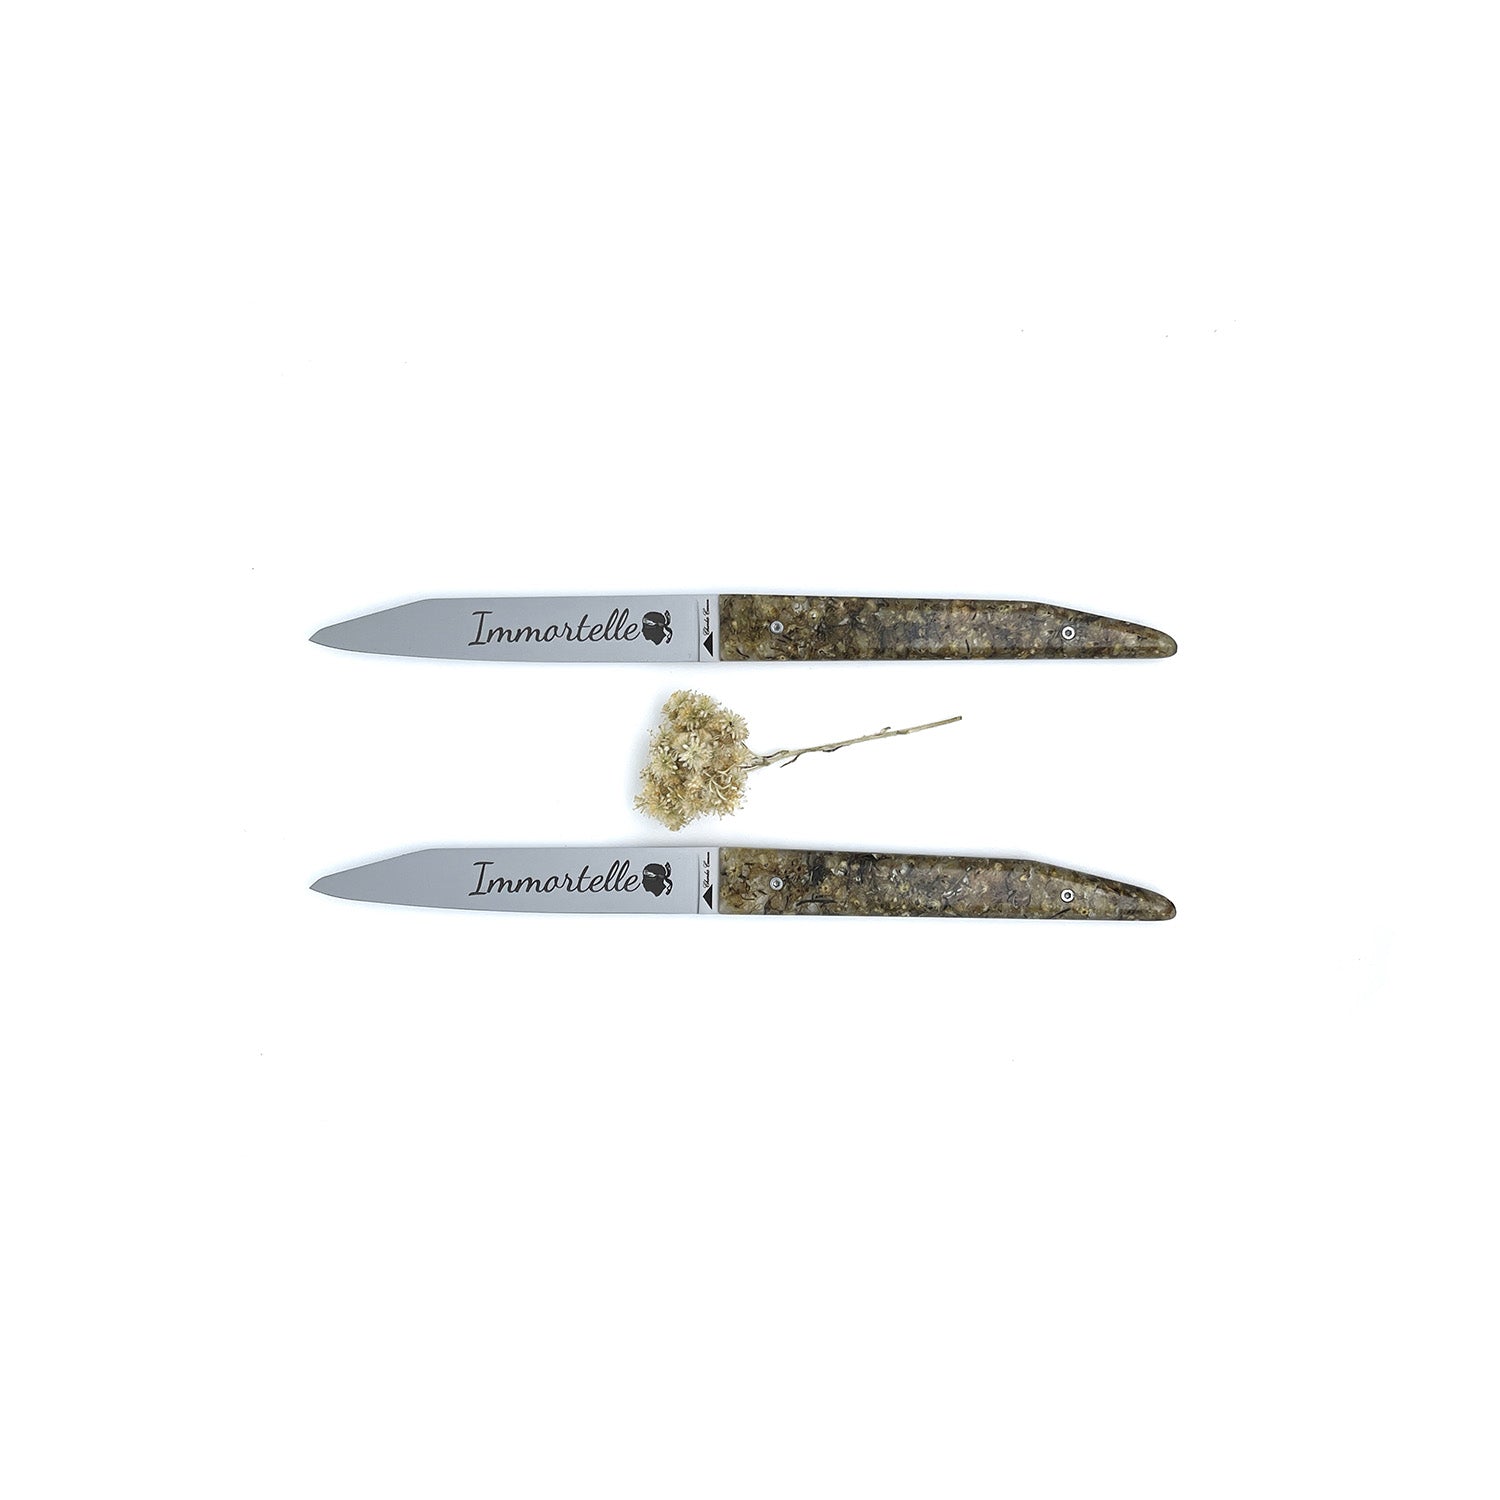 Duo box: 2 table knives with immortelle flower handles